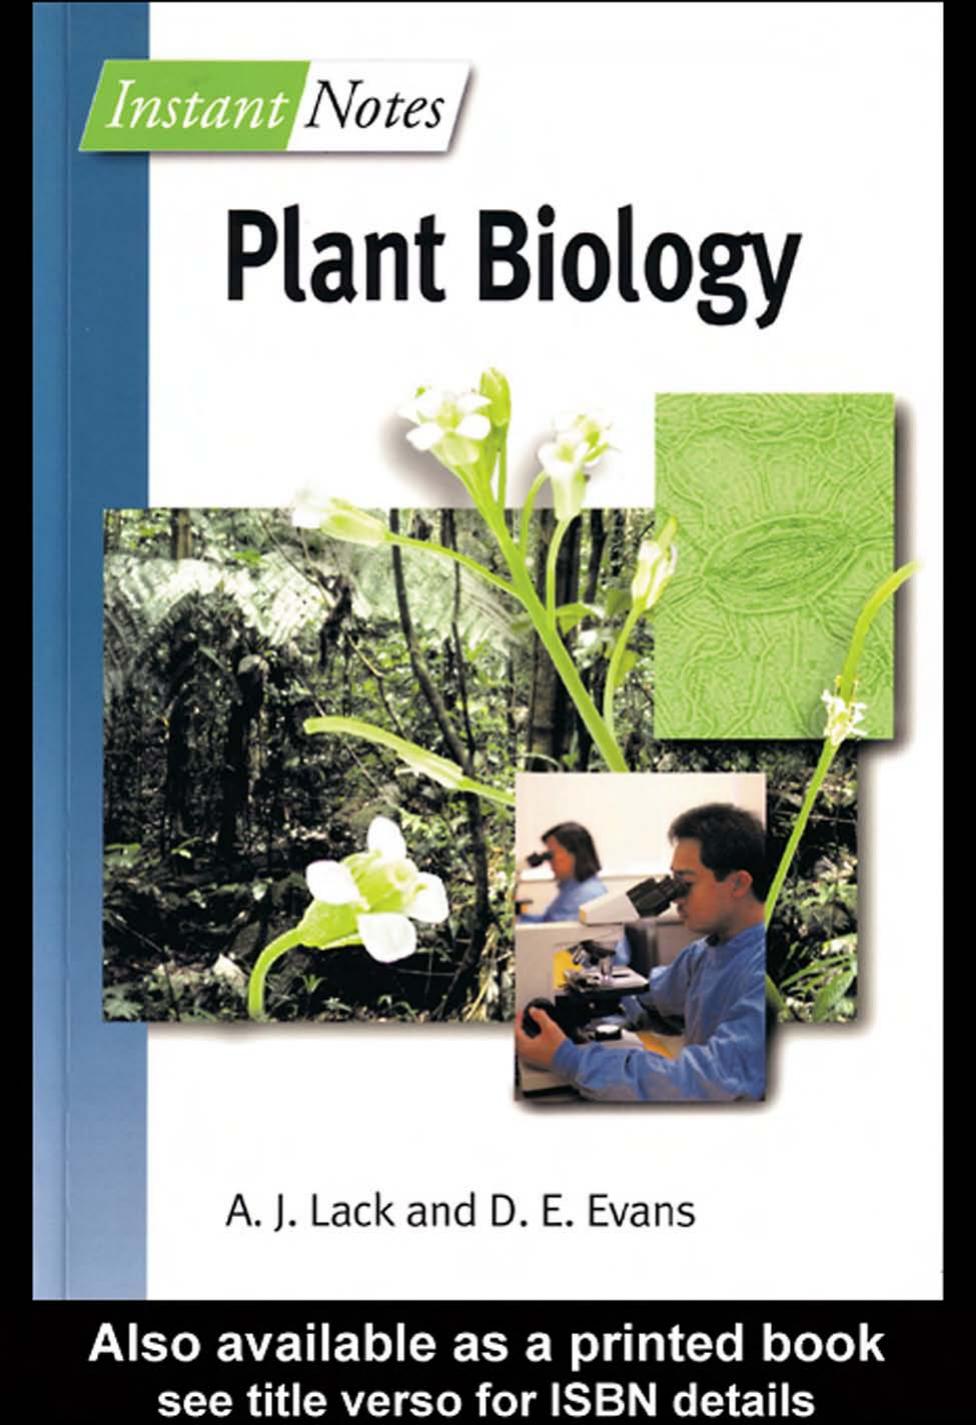 Instant Notes: Plant Biology